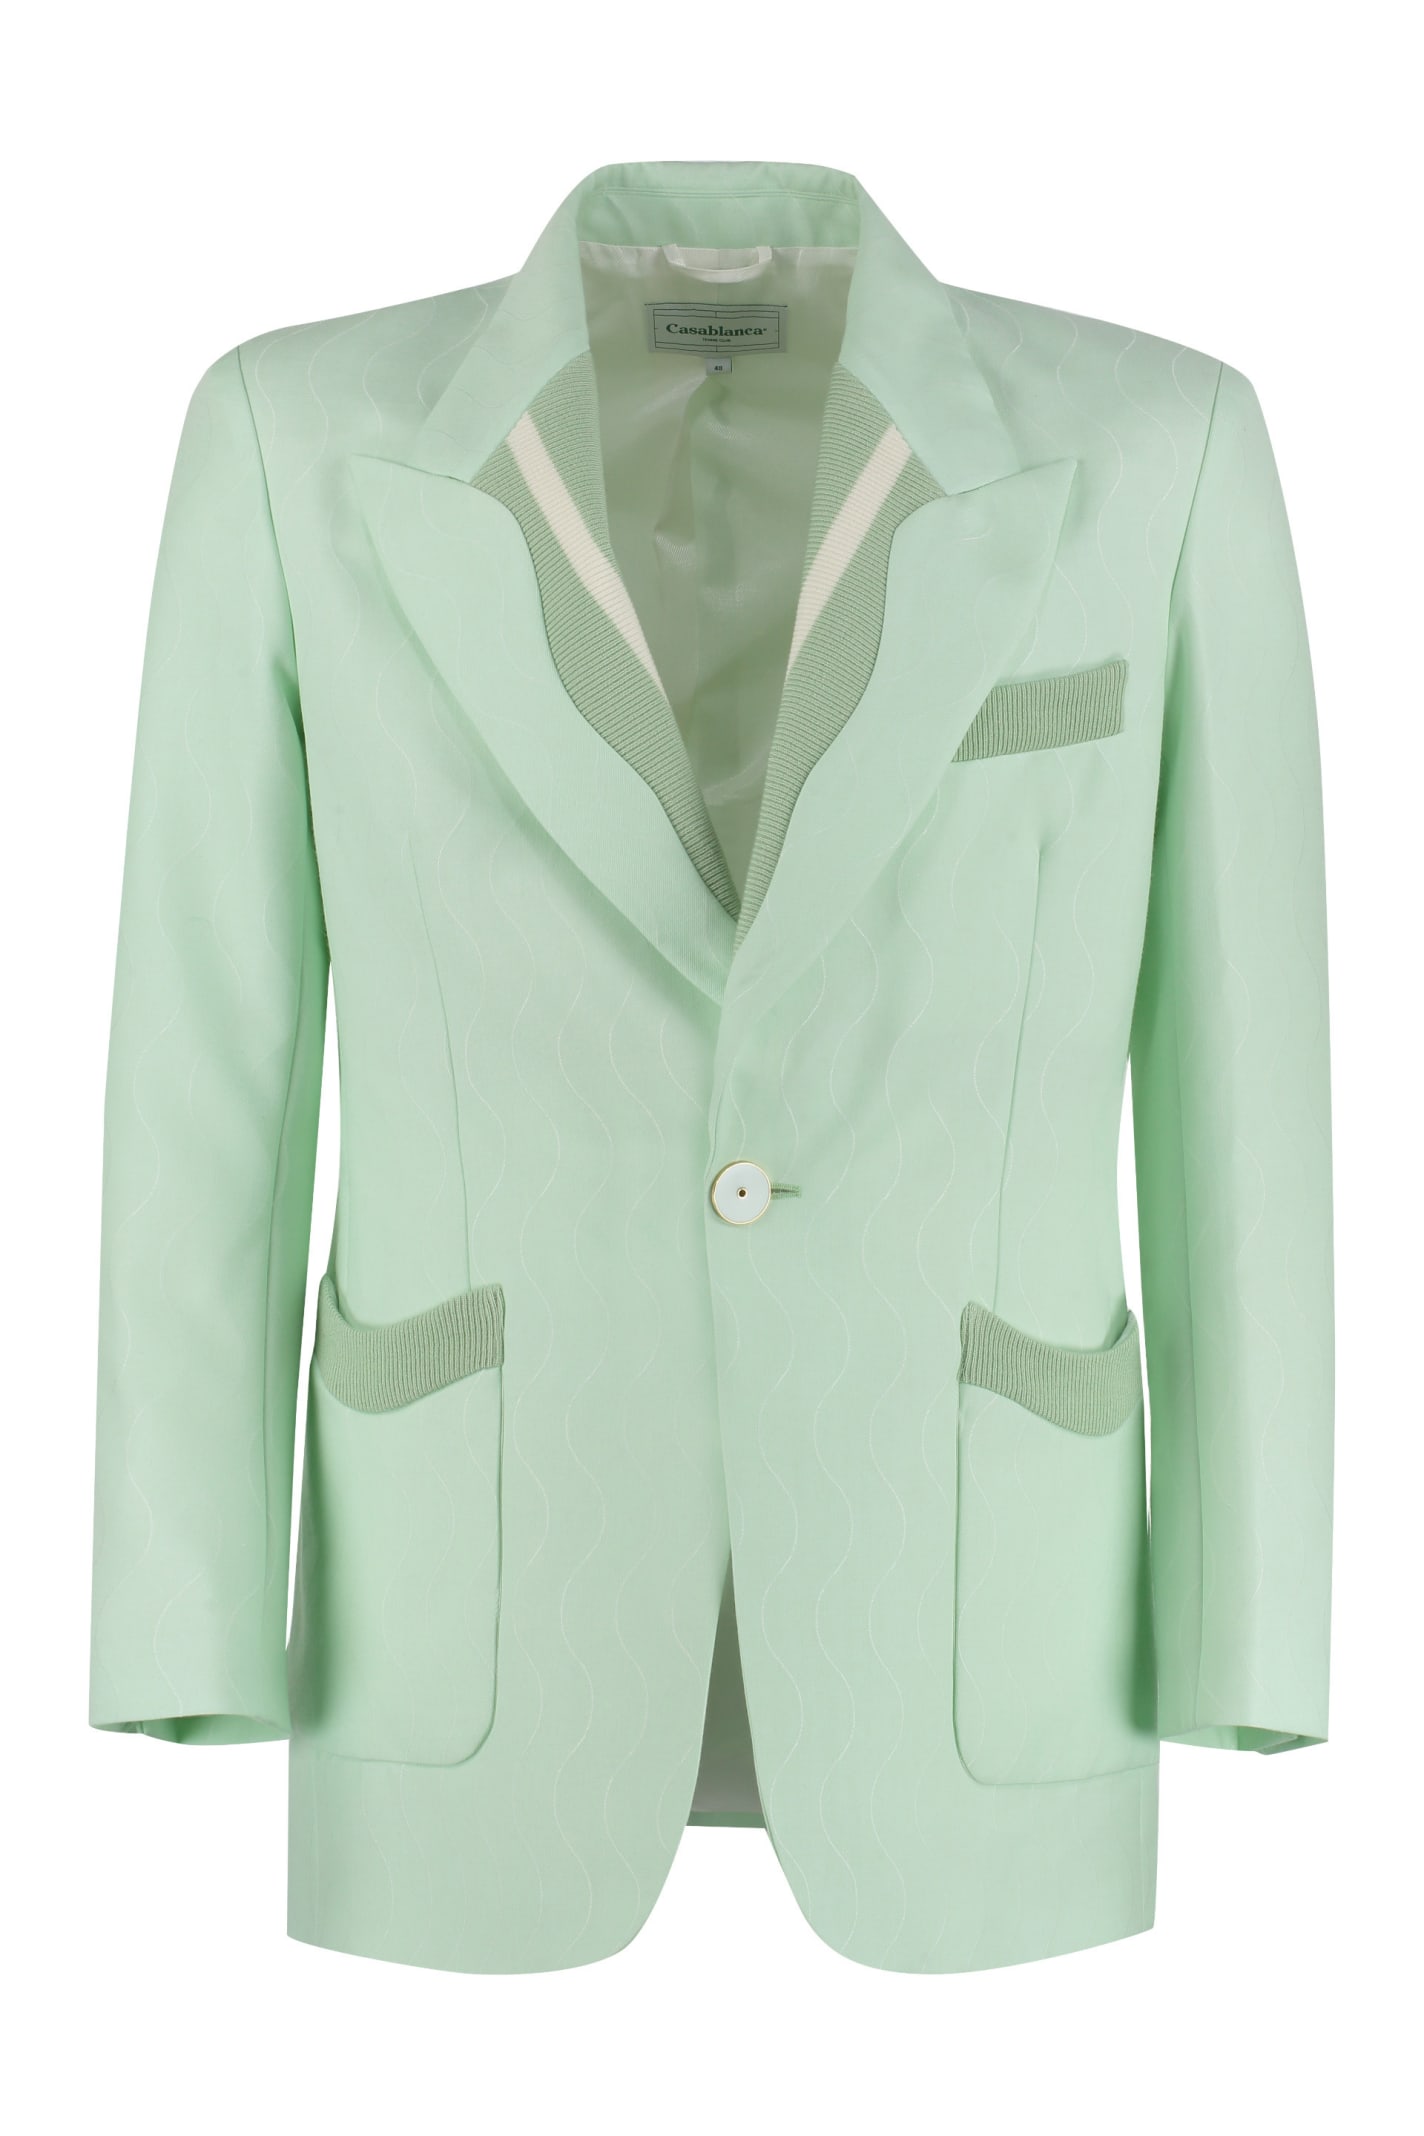 Casablanca Single-breasted One Button Jacket